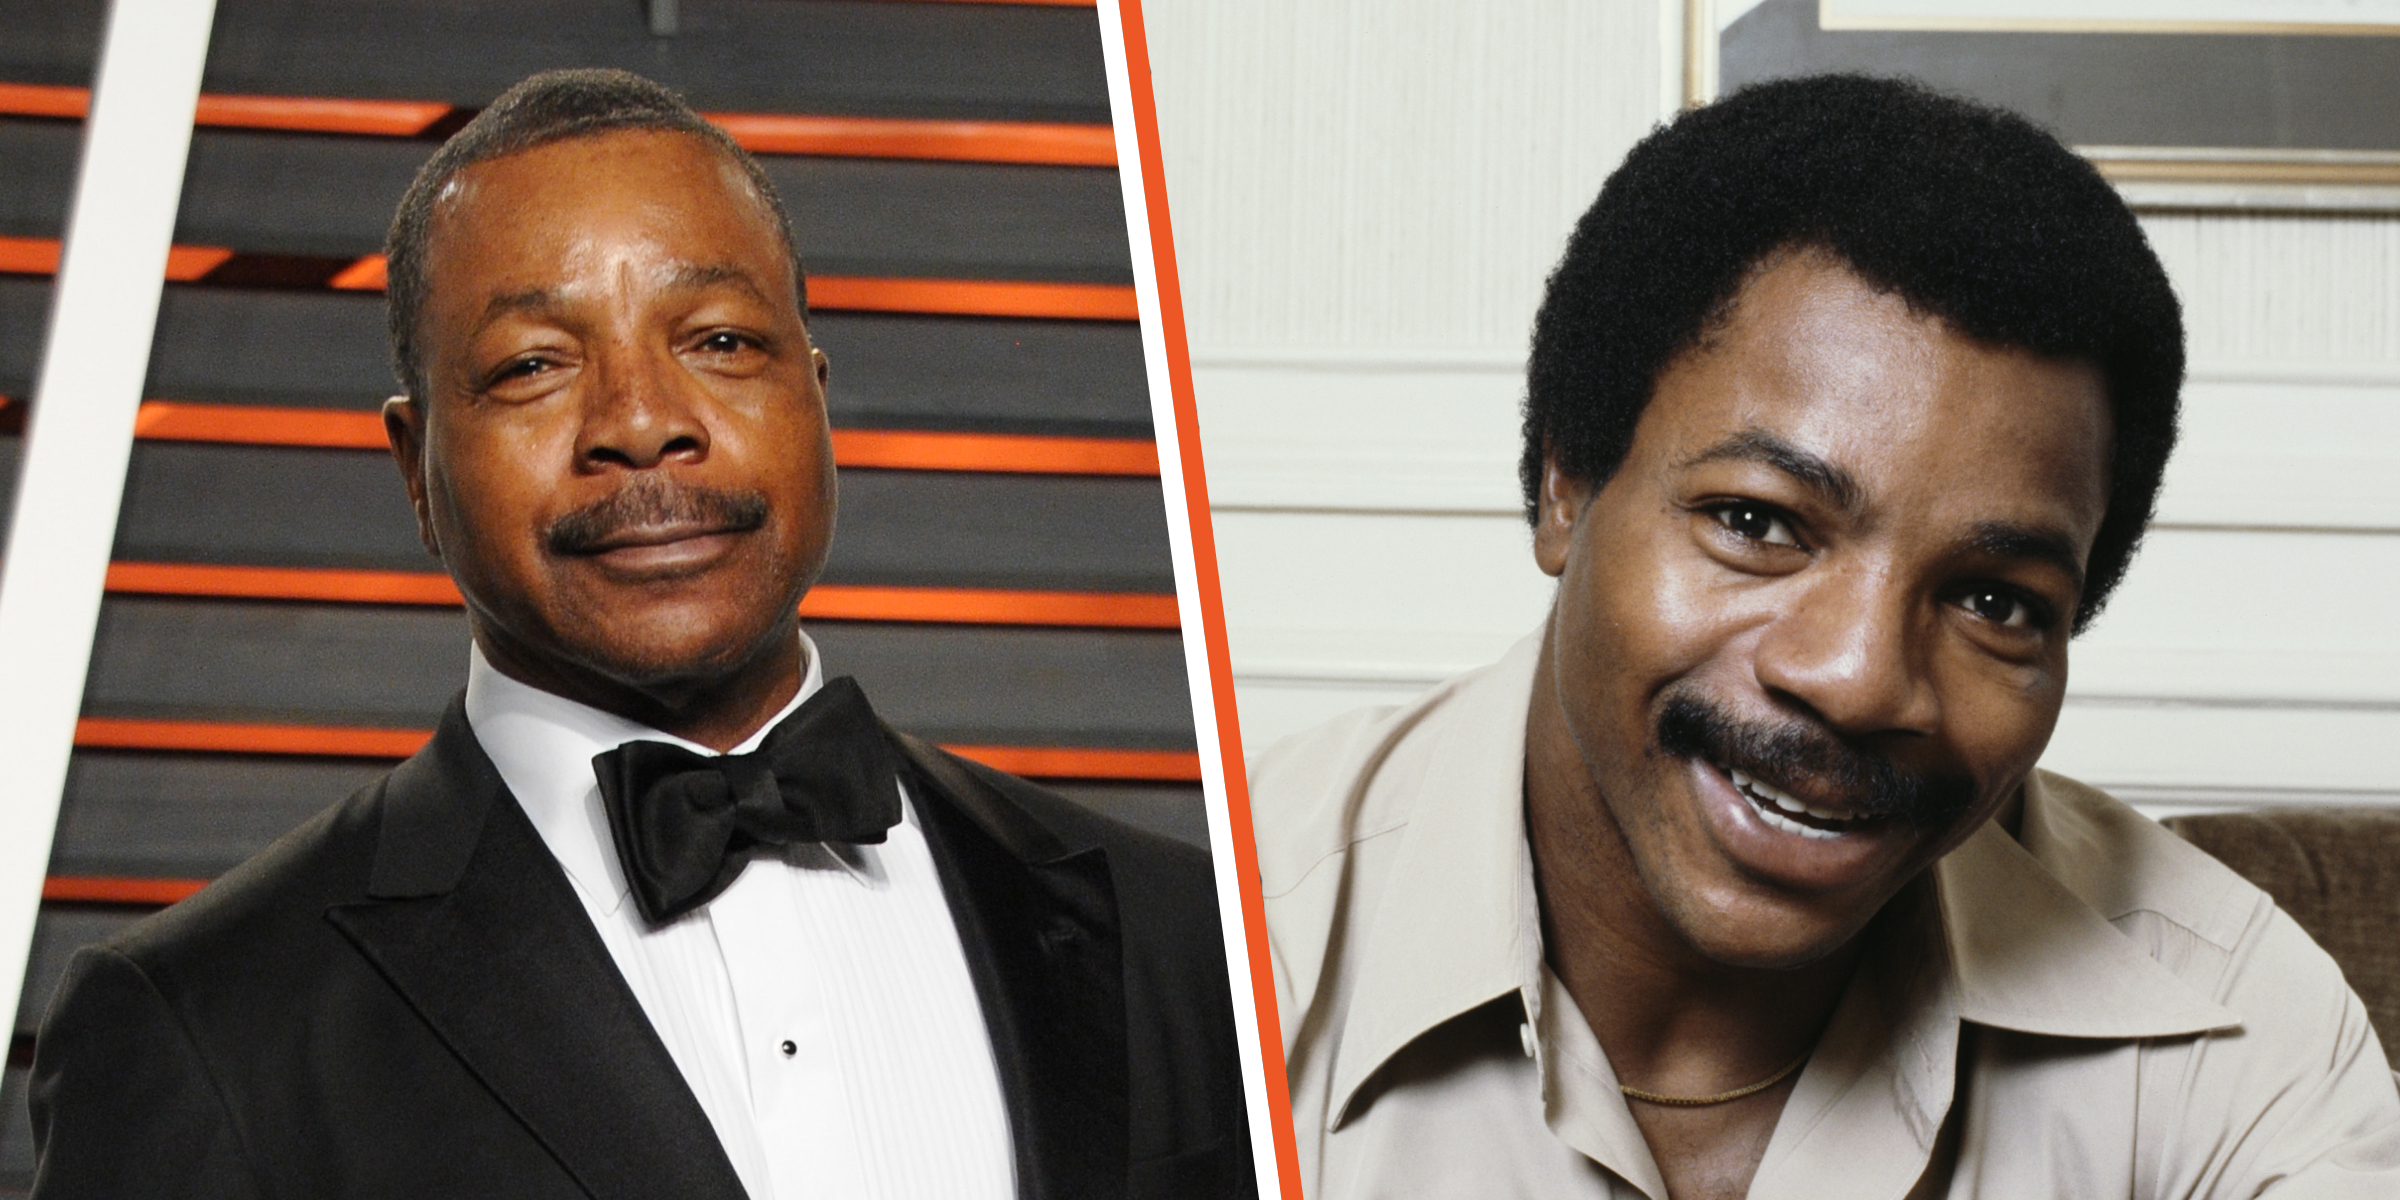 Carl Weathers | Source: Getty Images